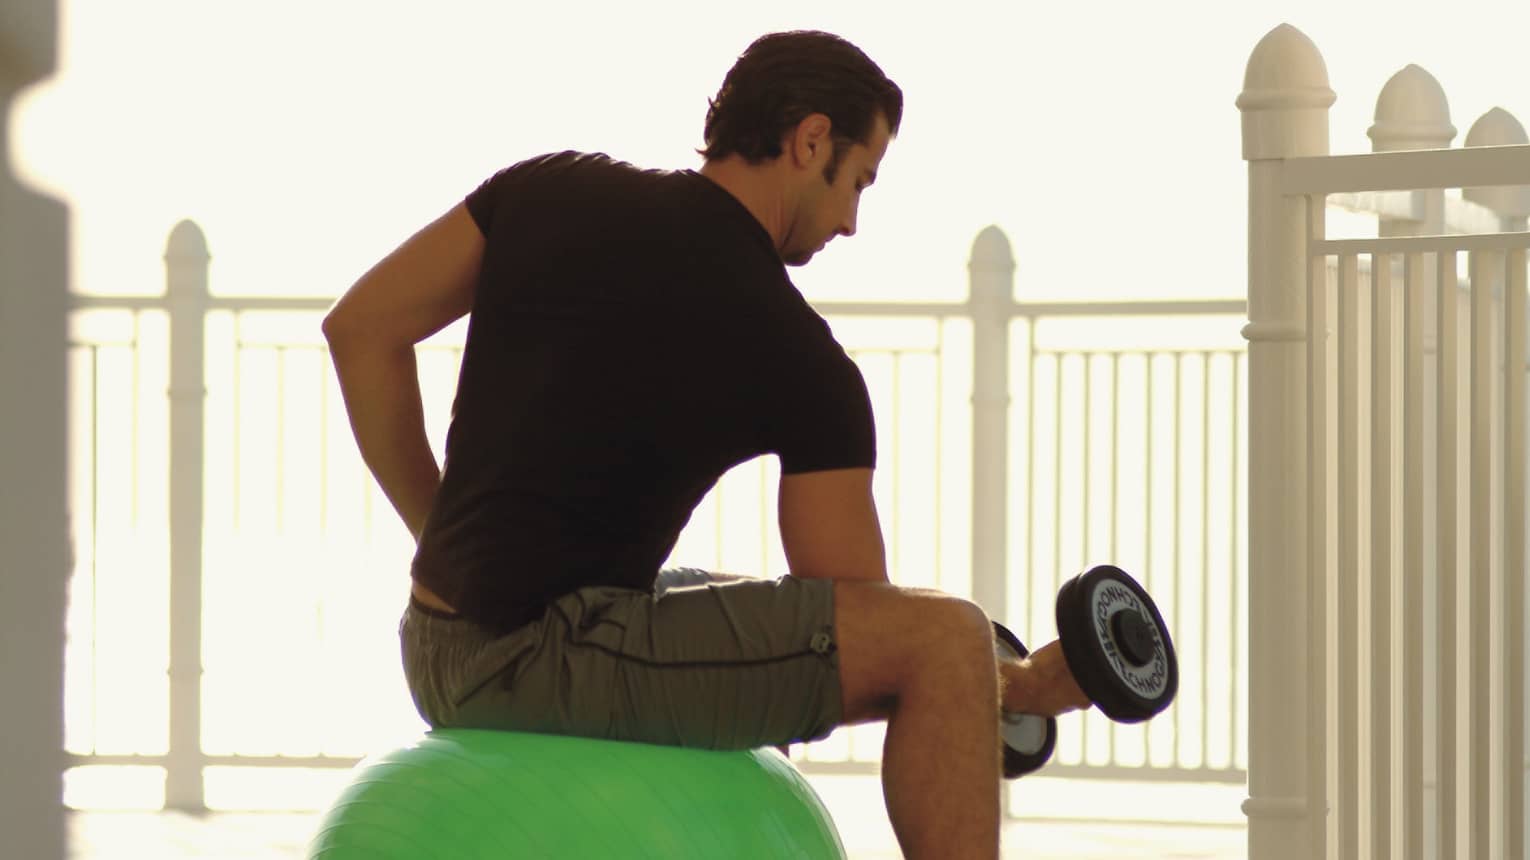 Back view of man in workout gear with hand weight, seated on exercise ball